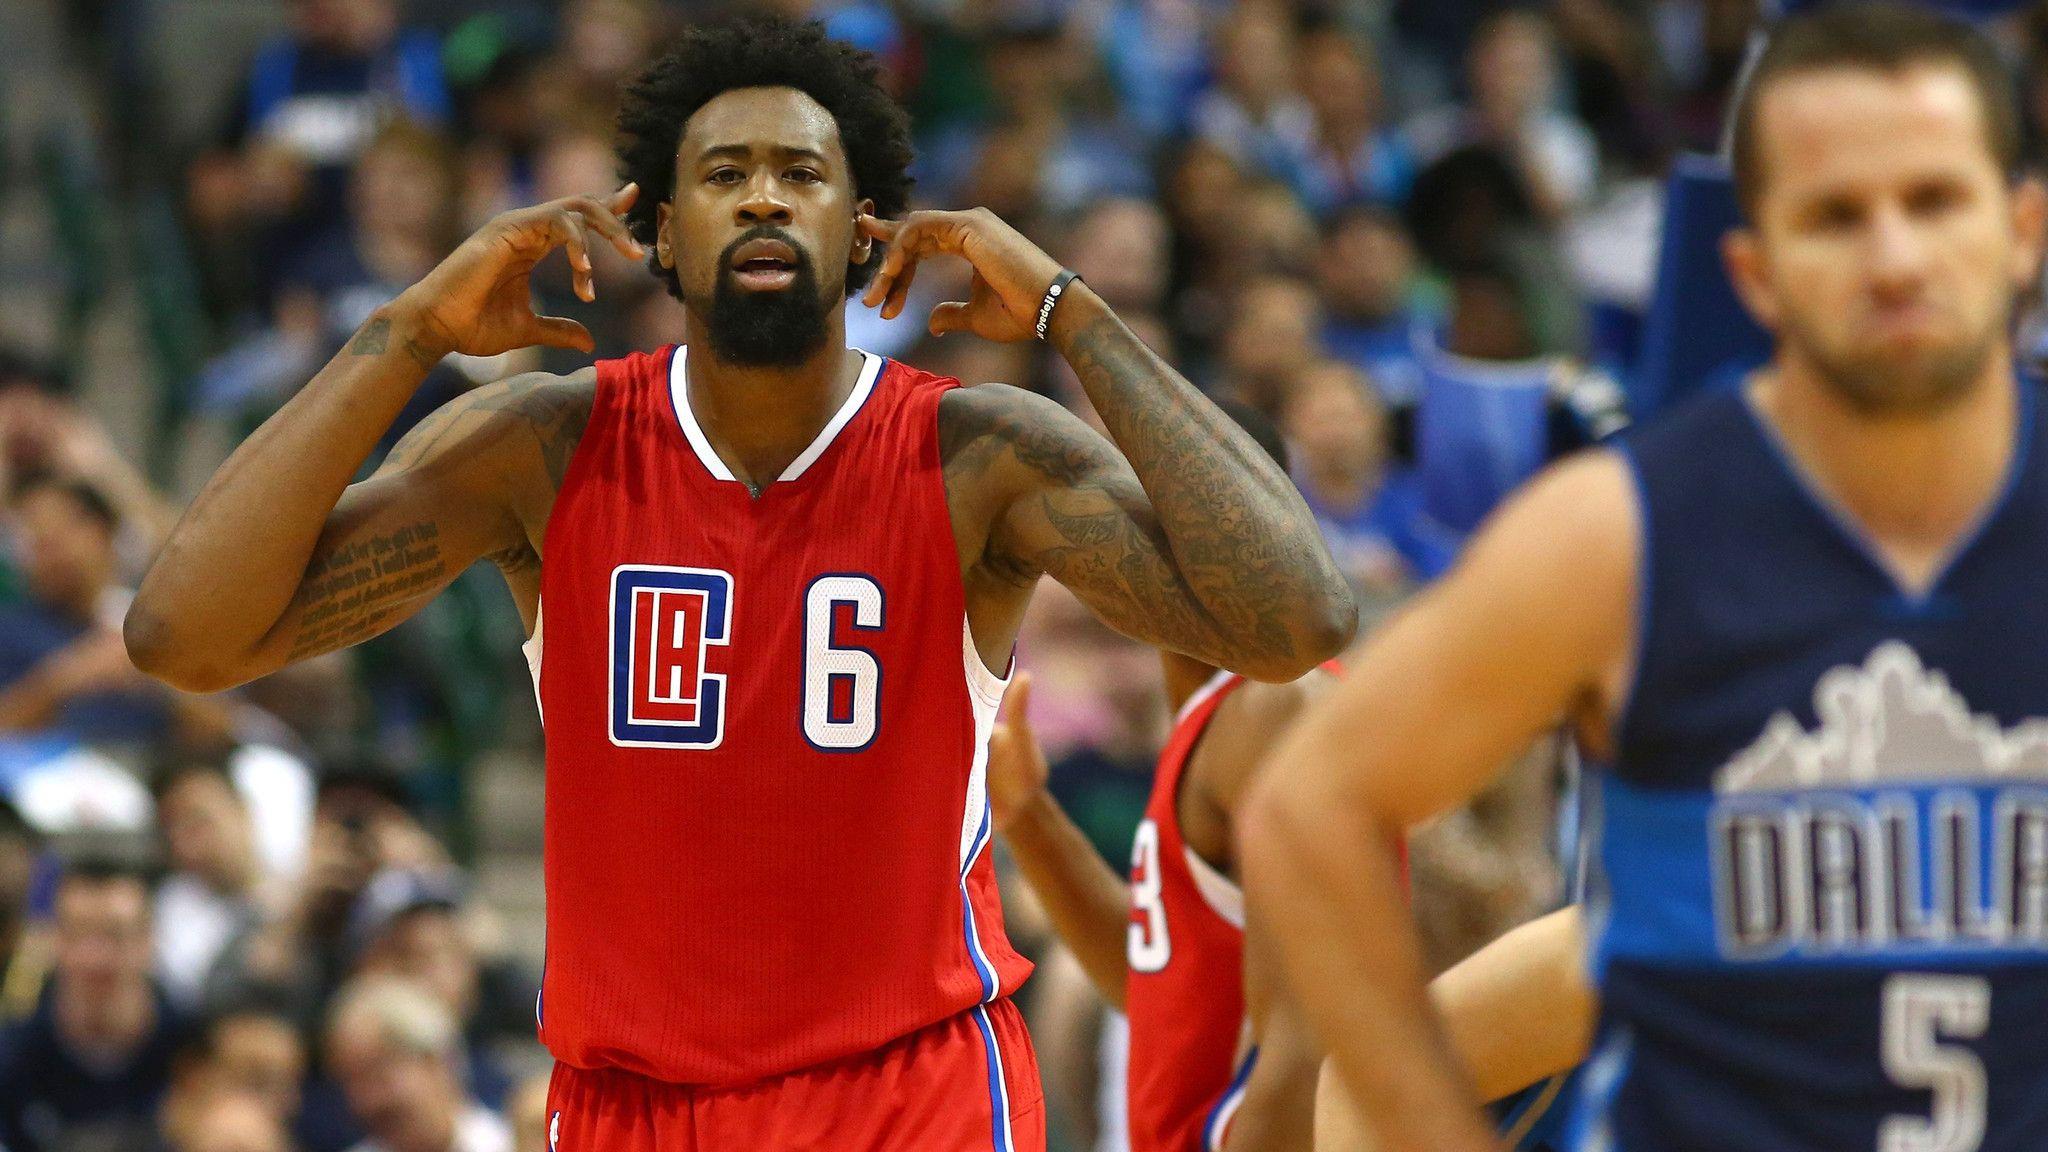 DeAndre Jordan to reporter: 'It's hard to hear you with all these